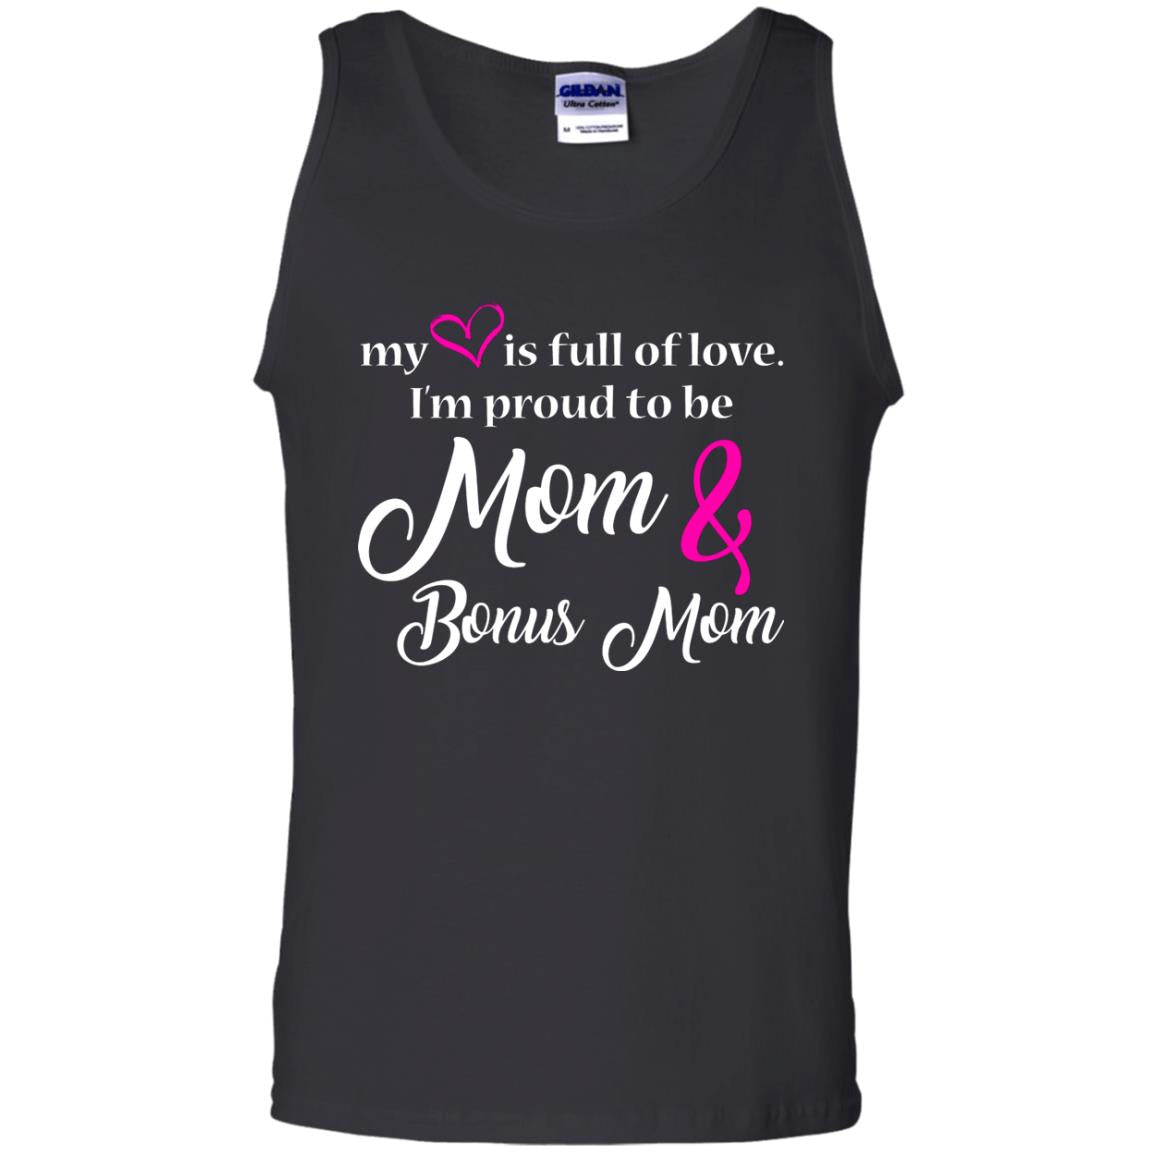 Mommy T-shirt My Heart Is Full Of Love